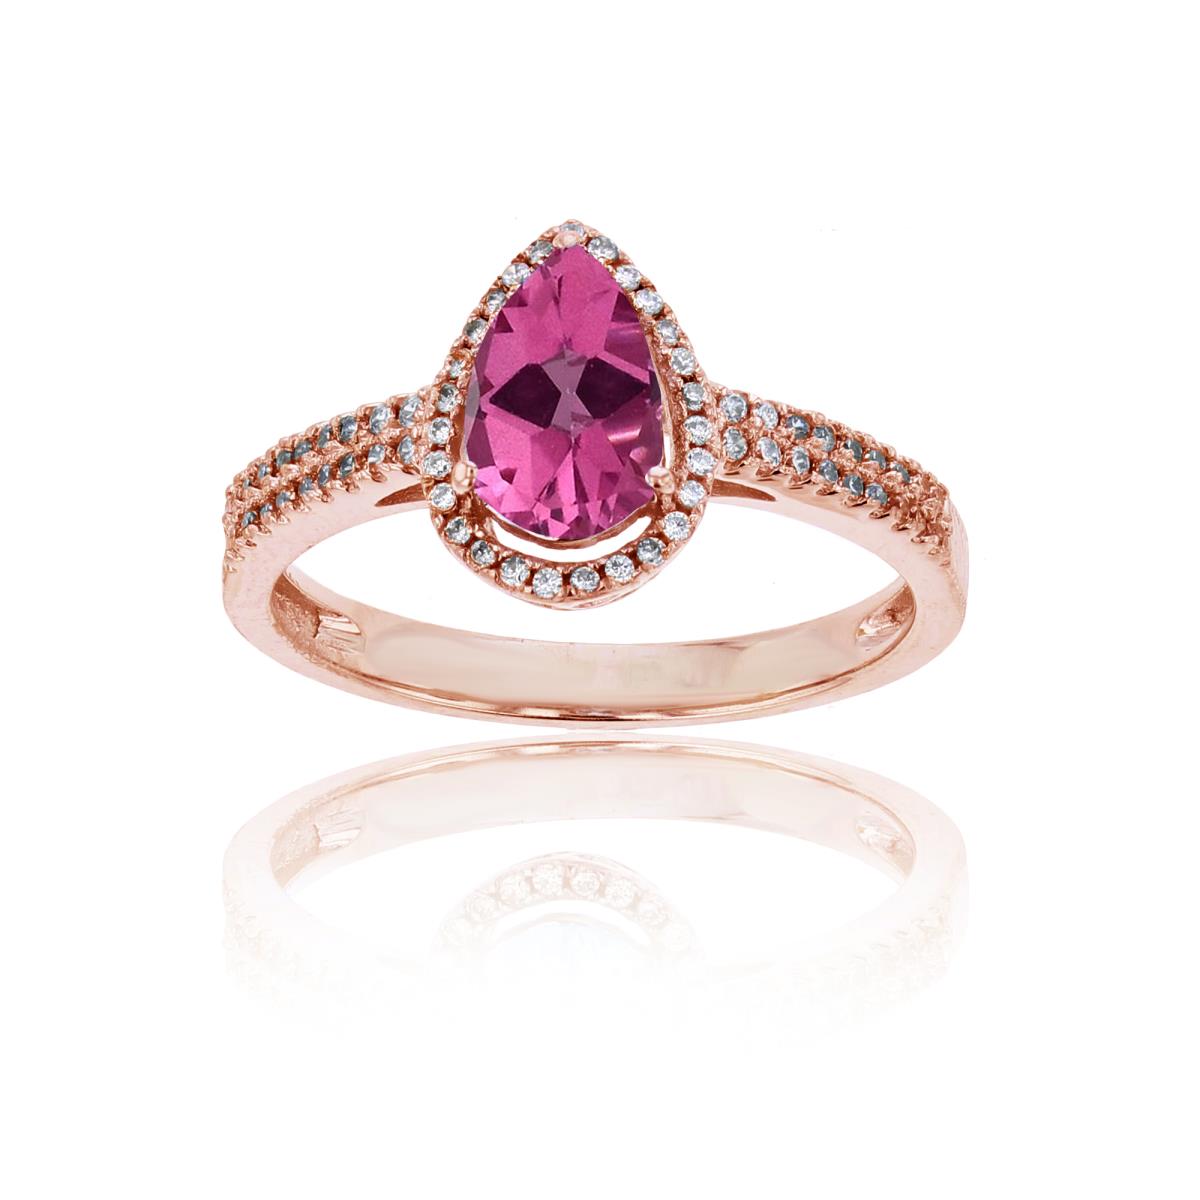 14K Rose Gold 0.20 CTTW Round Diamond & 8x5mm Pear Cut Created Pink Sapphire Halo Ring